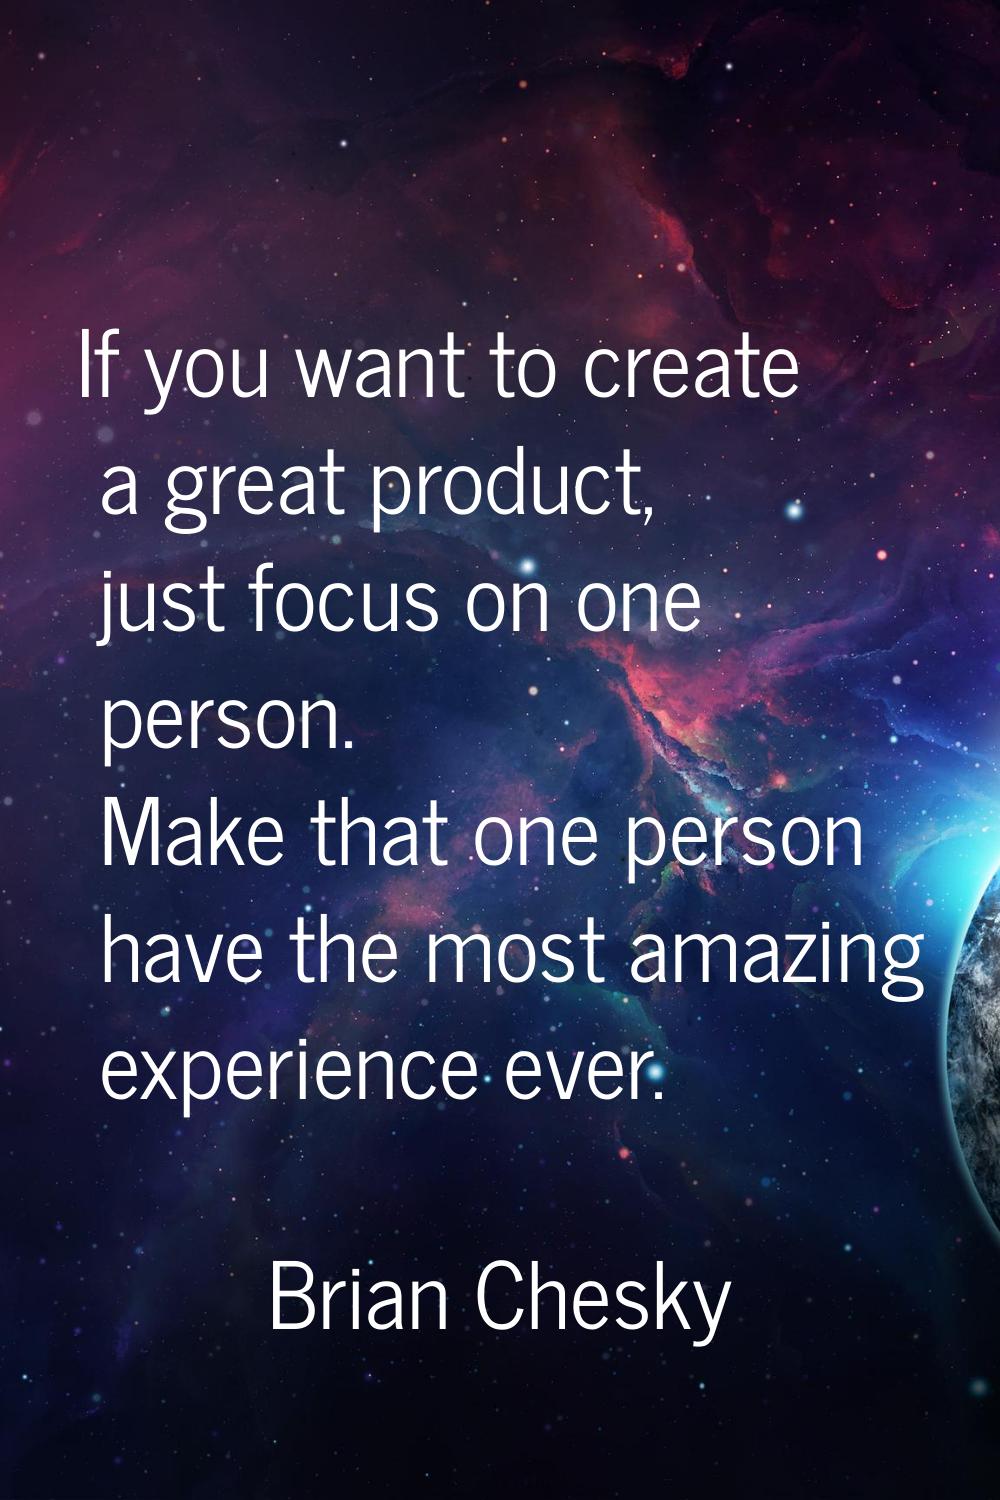 If you want to create a great product, just focus on one person. Make that one person have the most